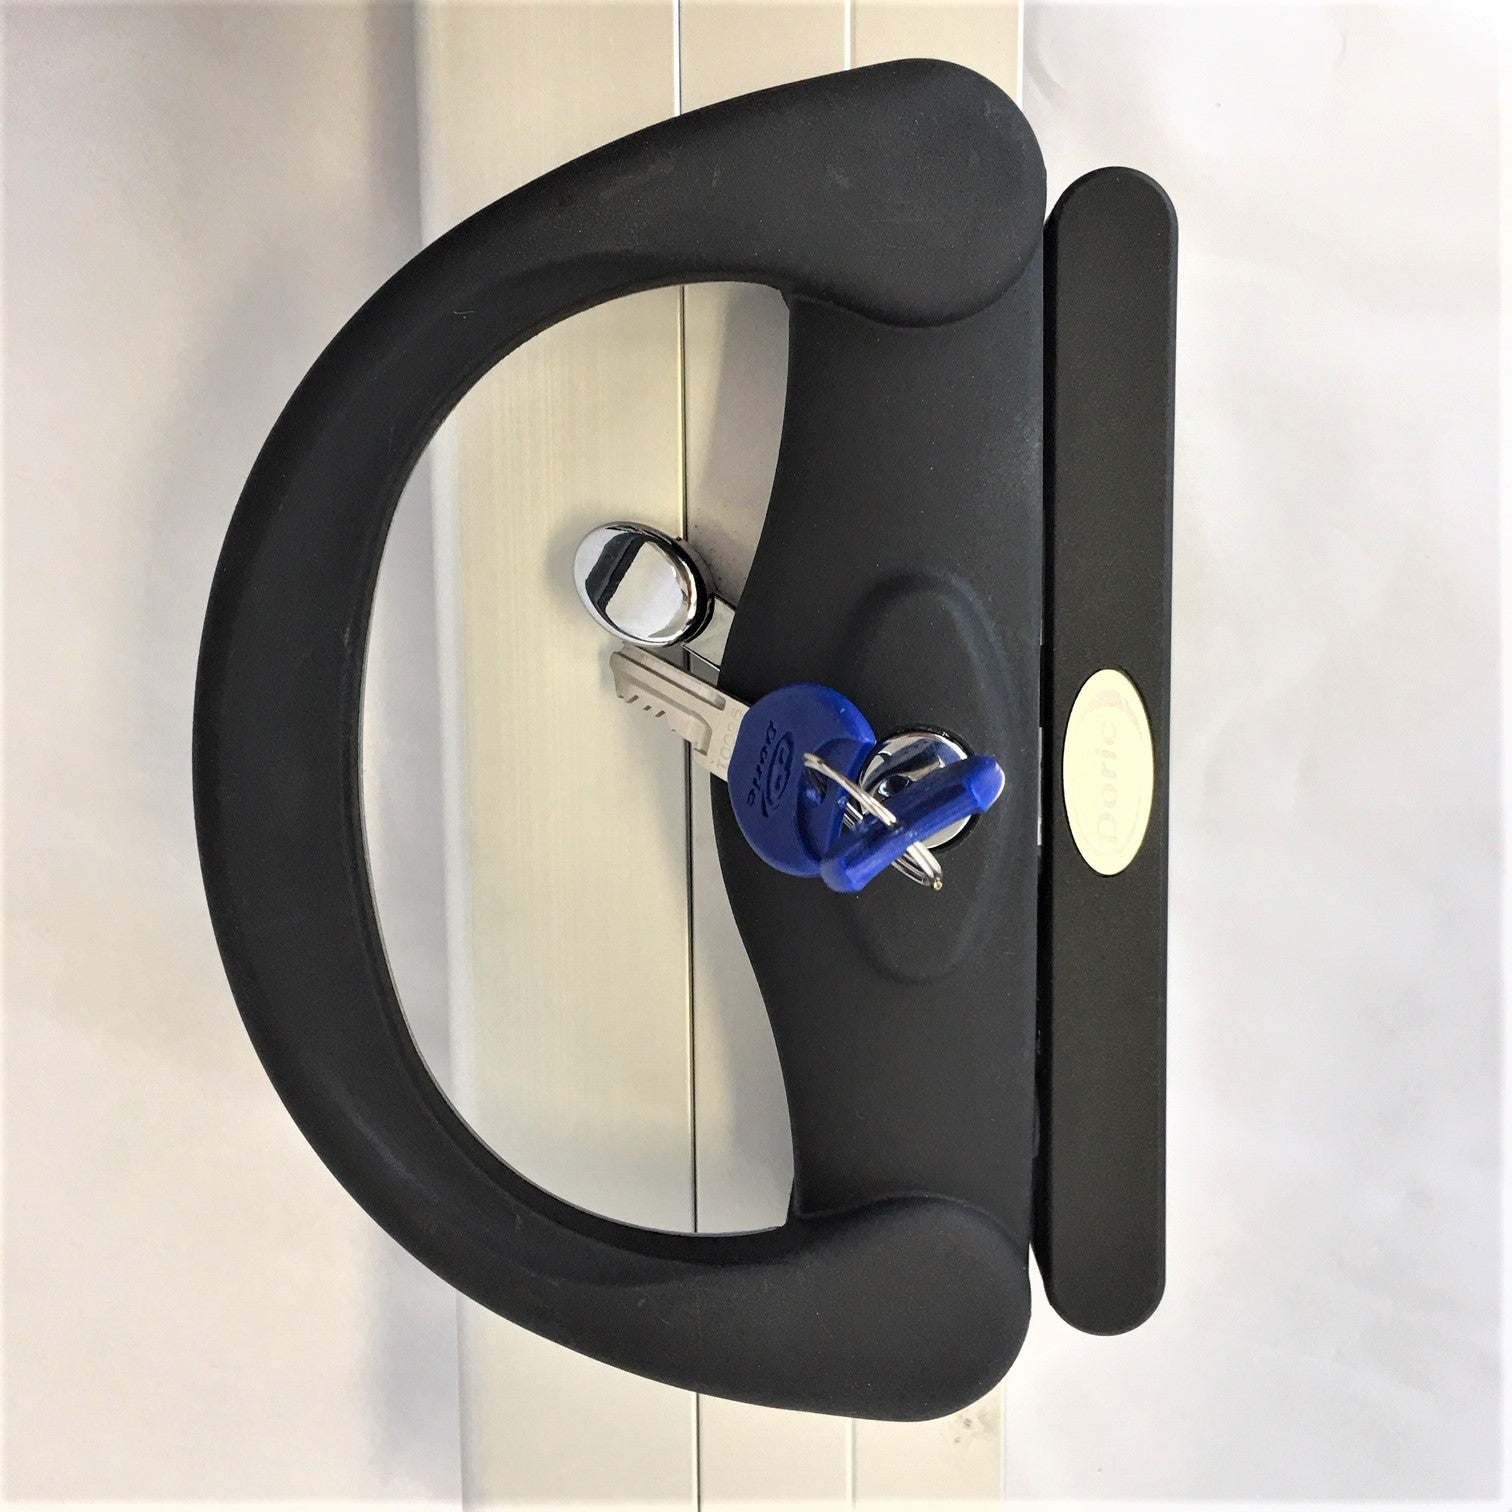 Sliding door lock DS930 Wilton by Doric for sliding aluminium patio doors + ADD flat external handles DS840 and DS841 if required